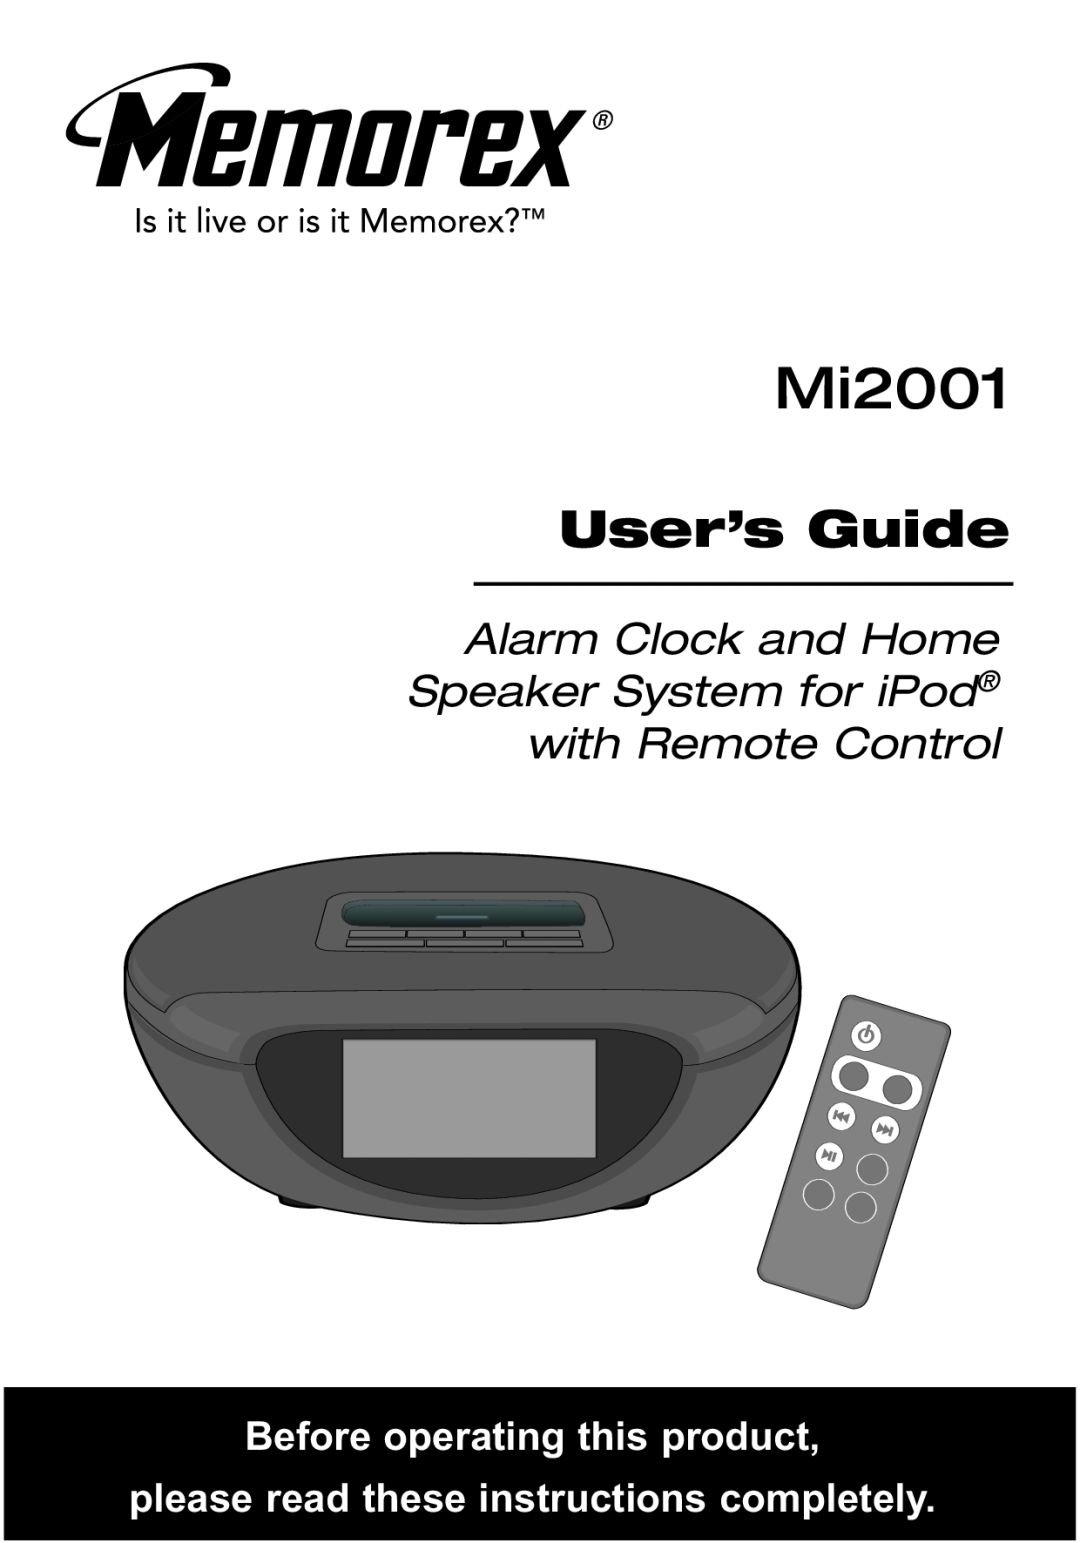 Memorex M12001 manual Mi2001, Alarm Clock and Home Speaker System for iPod with Remote Control, User’s Guide 